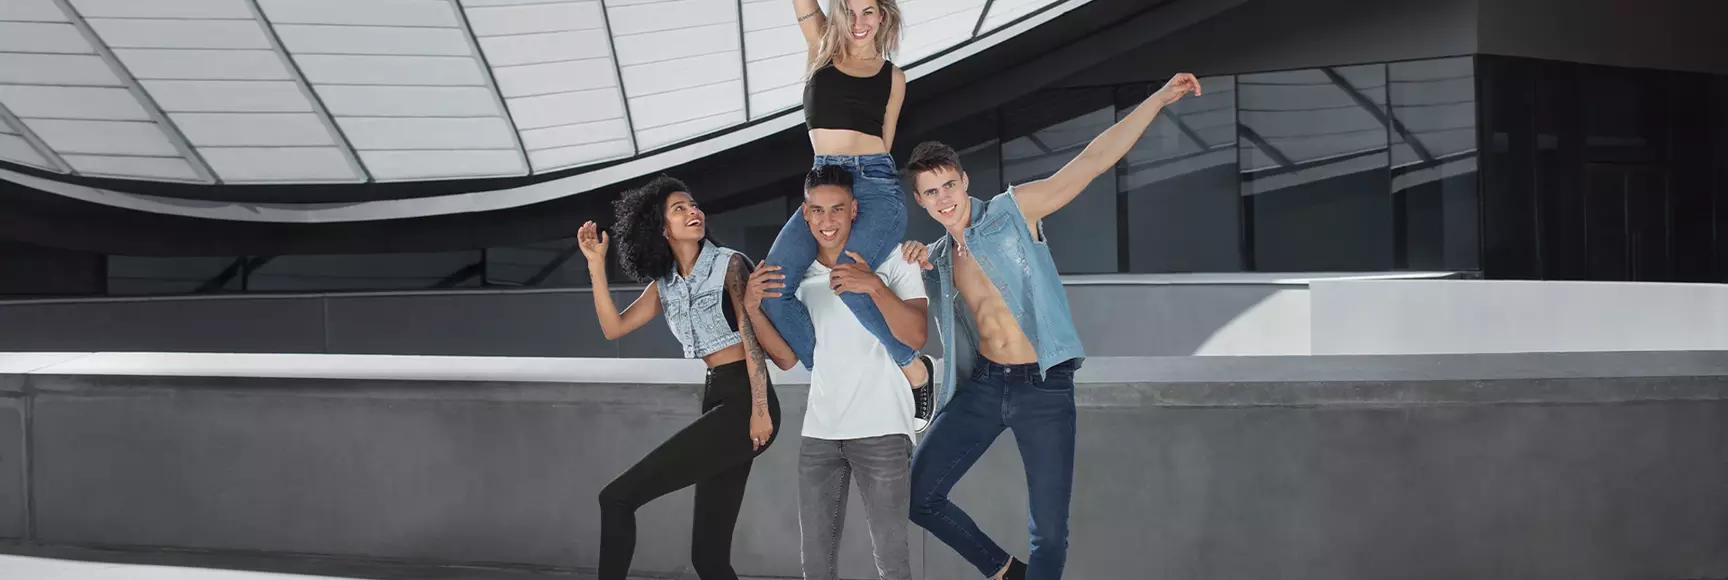 People moving freely in stretch denim jeans powered by solutions from the LYCRA® brand providing lasting comfort, fit, shape.